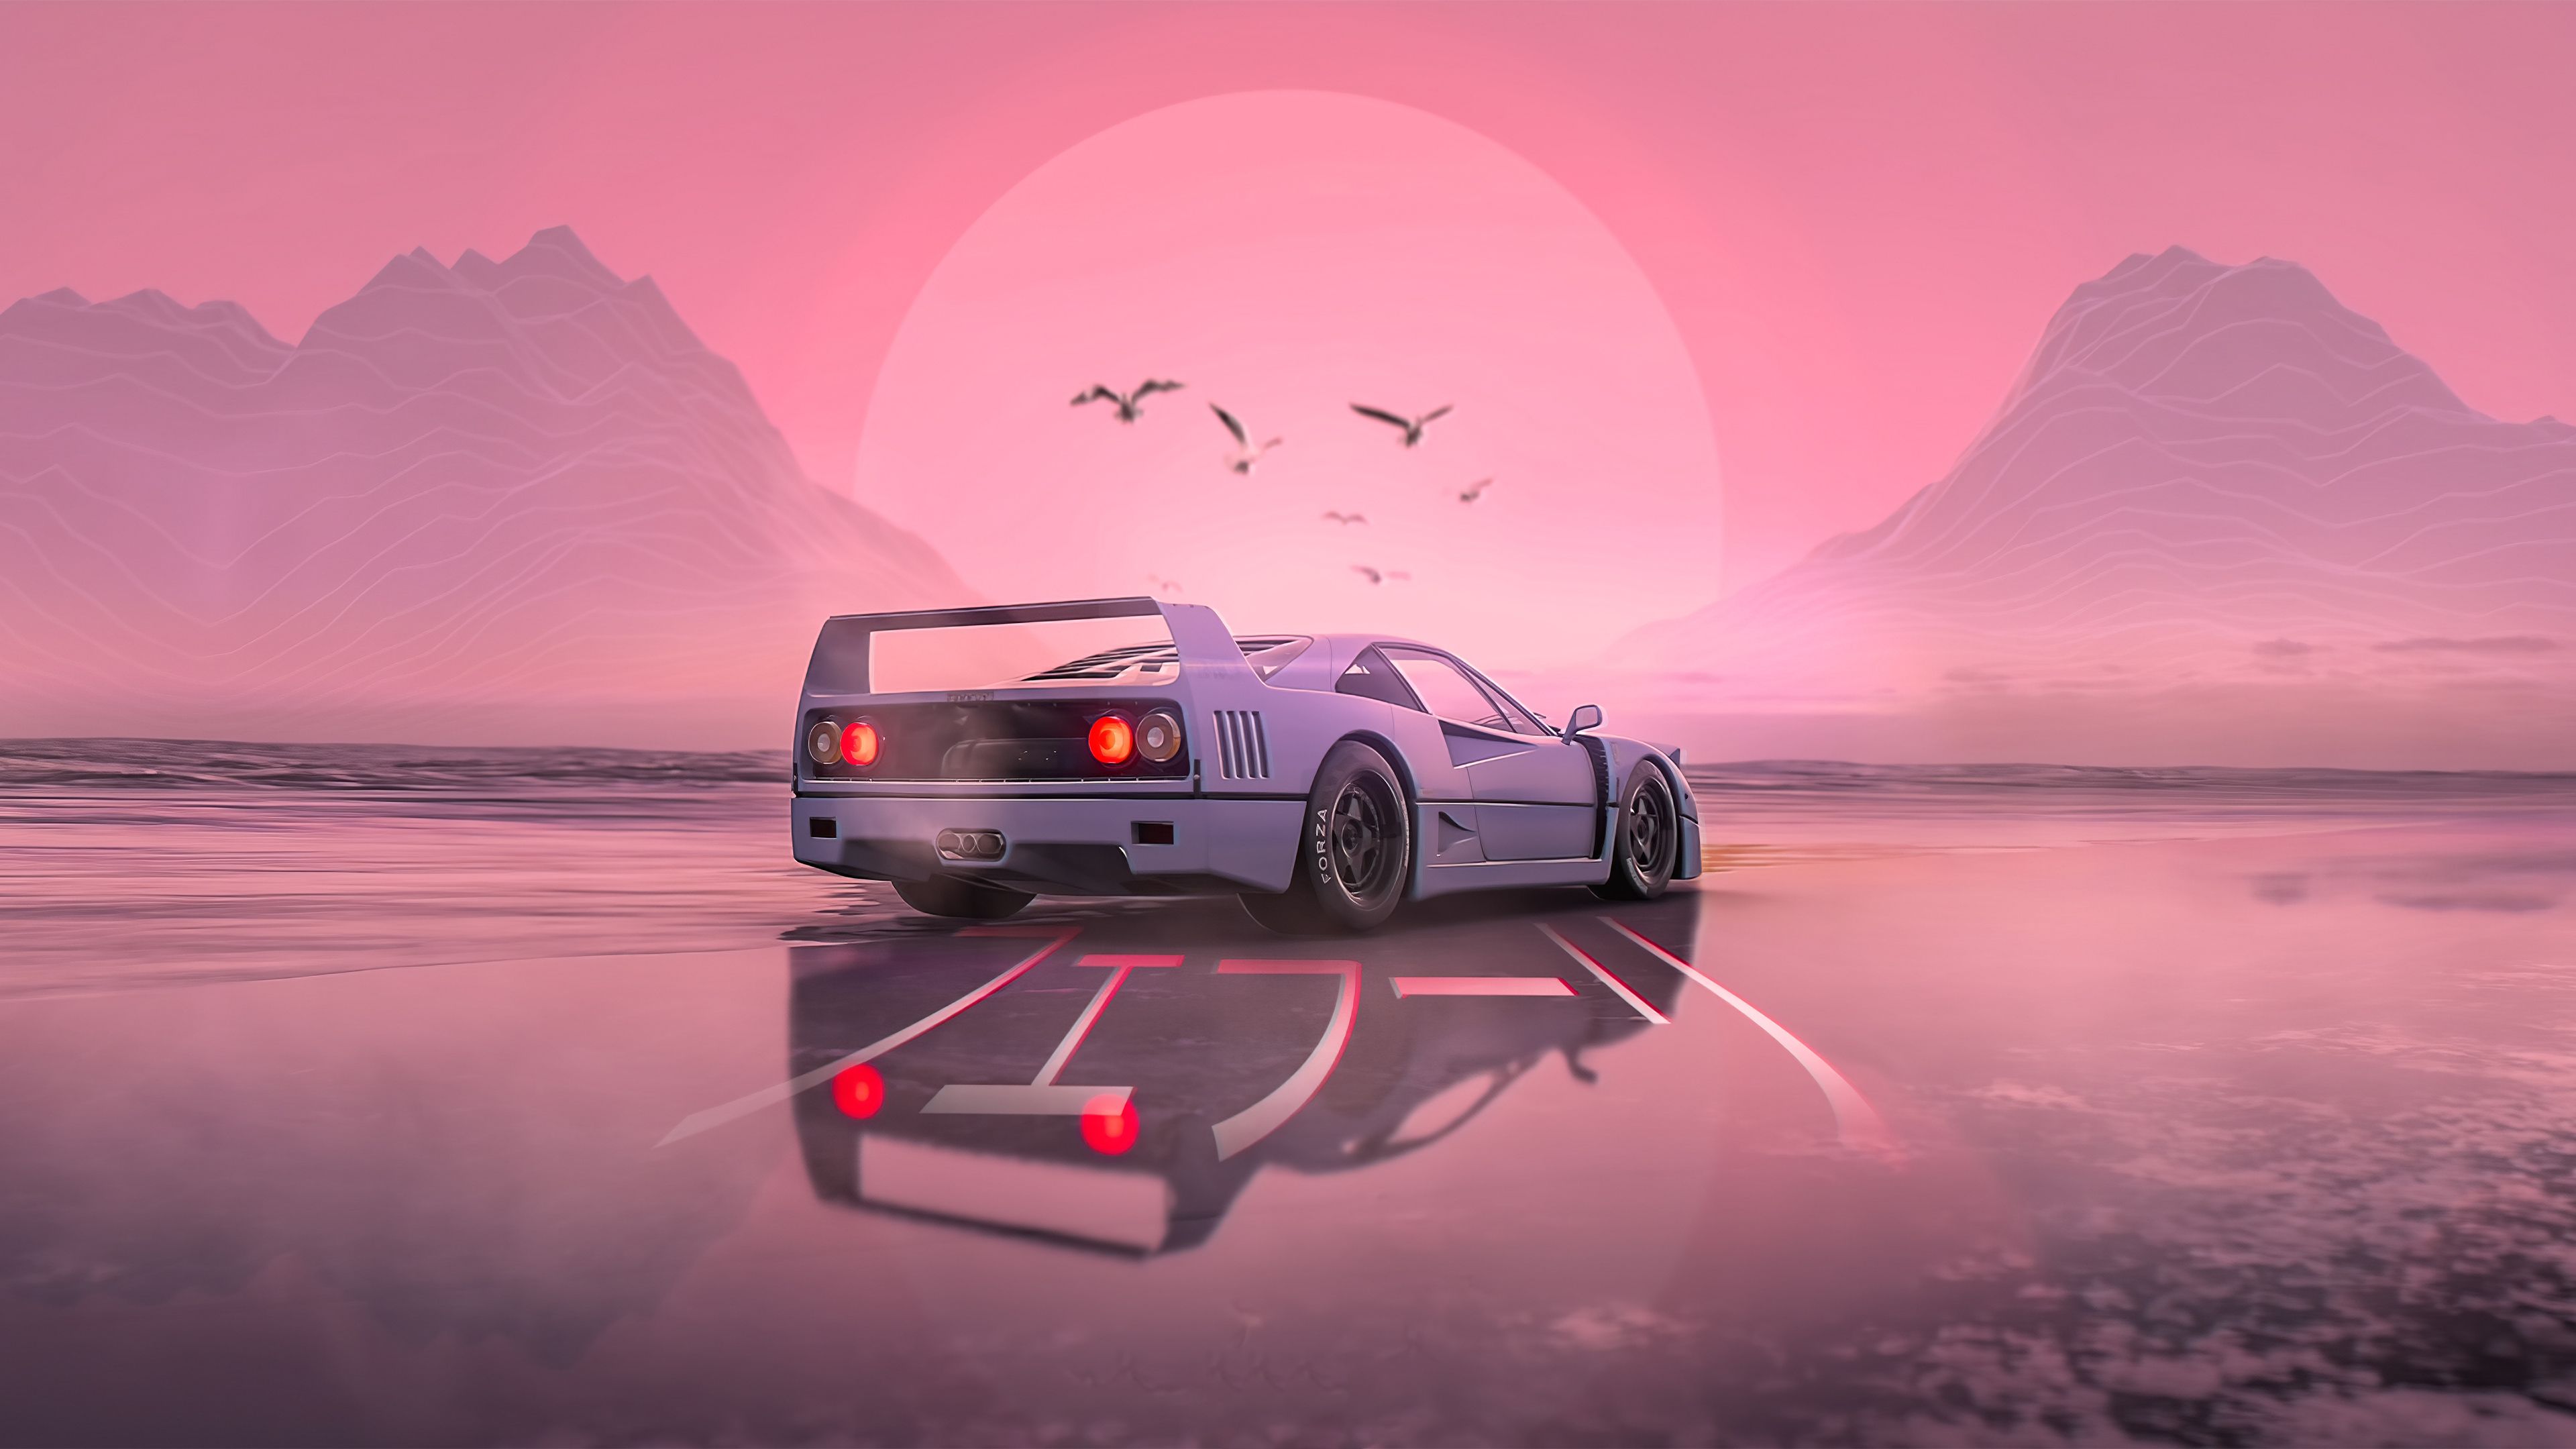 Drift 4K wallpapers for your desktop or mobile screen free and easy to  download